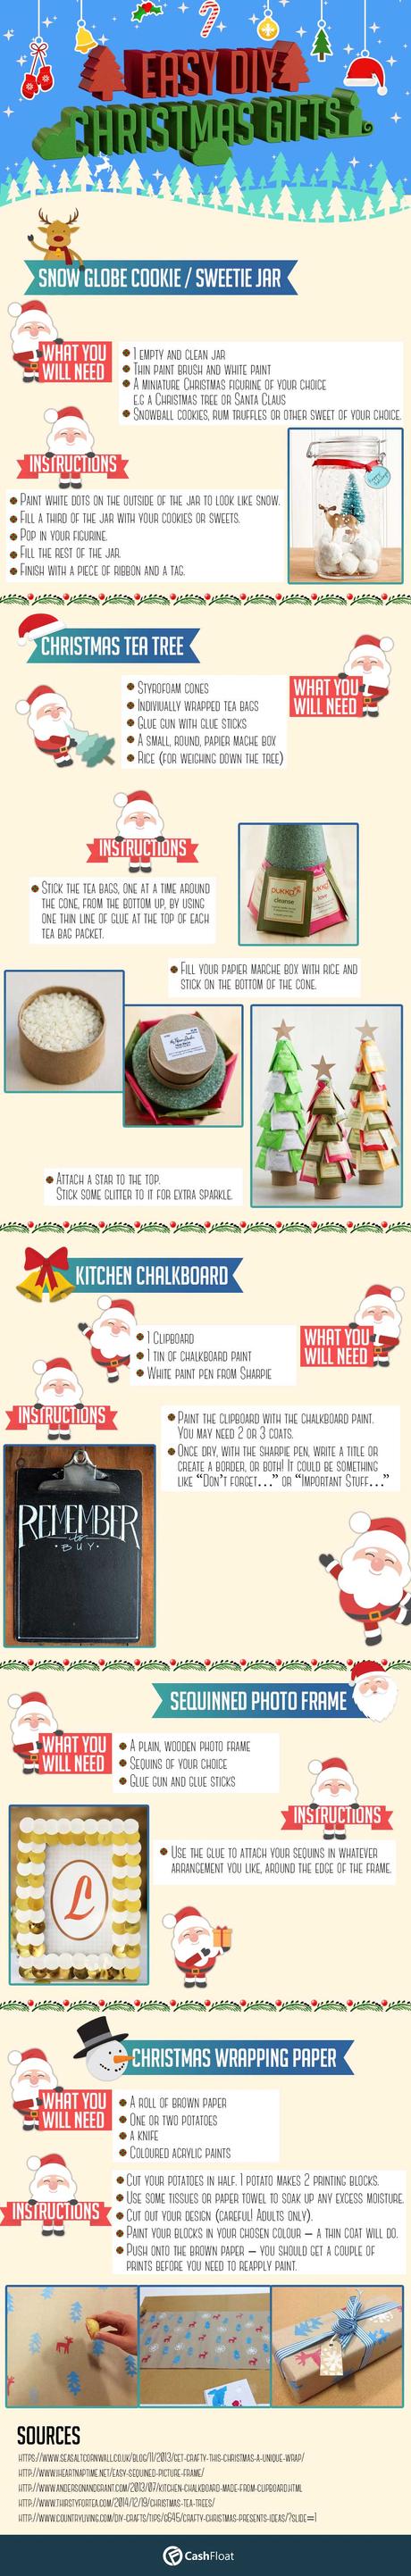 Amazing Christmas gifts you can do yourself